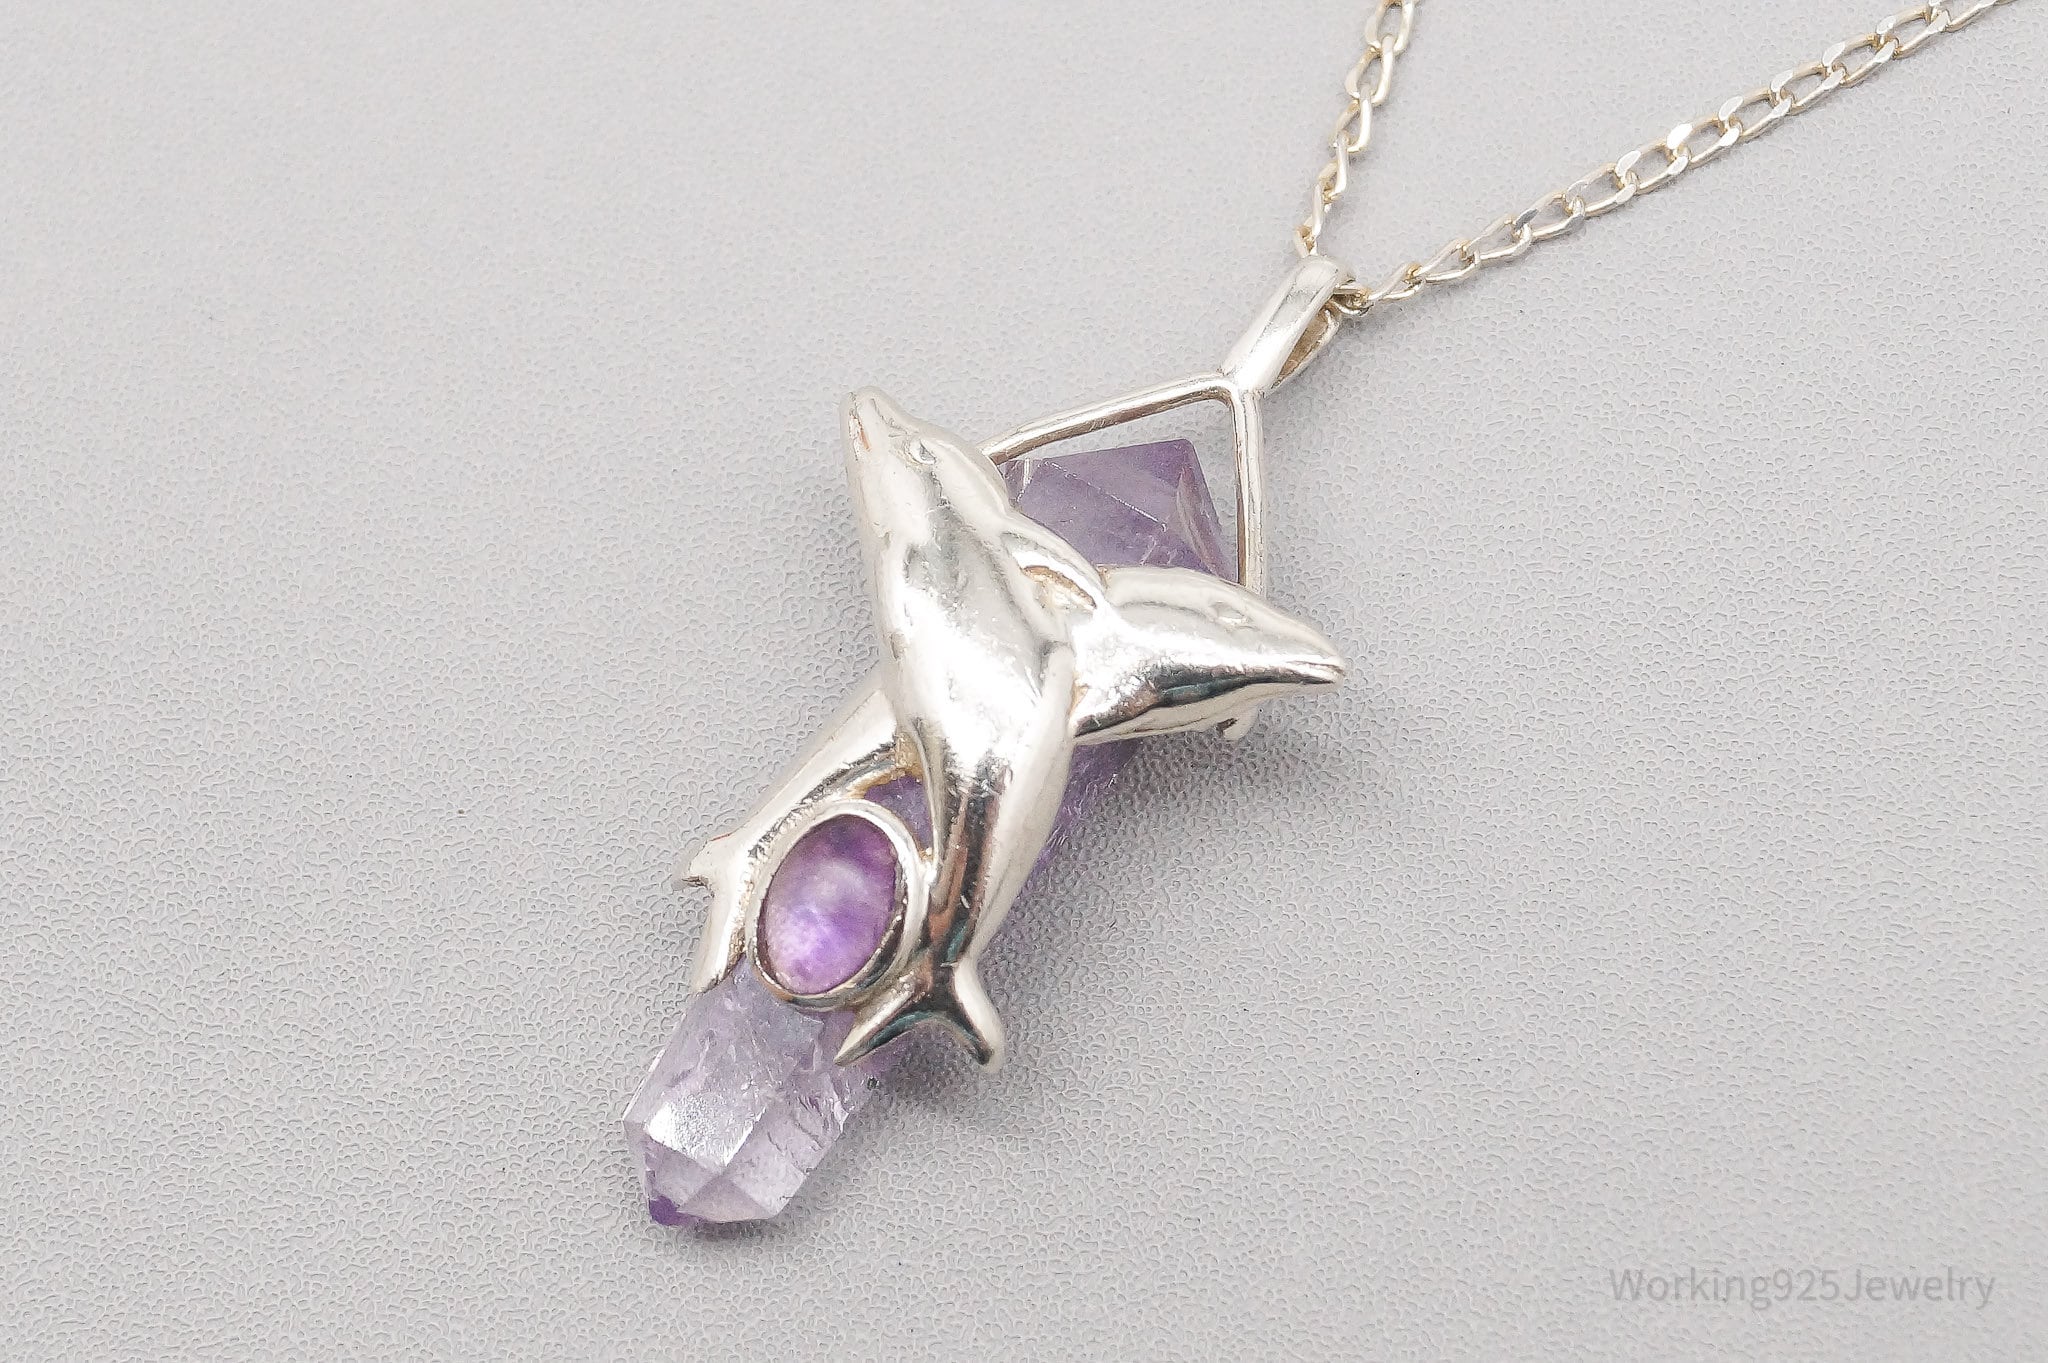 Vintage Amethyst Crystal Dolphins Sterling Silver Necklace 16"